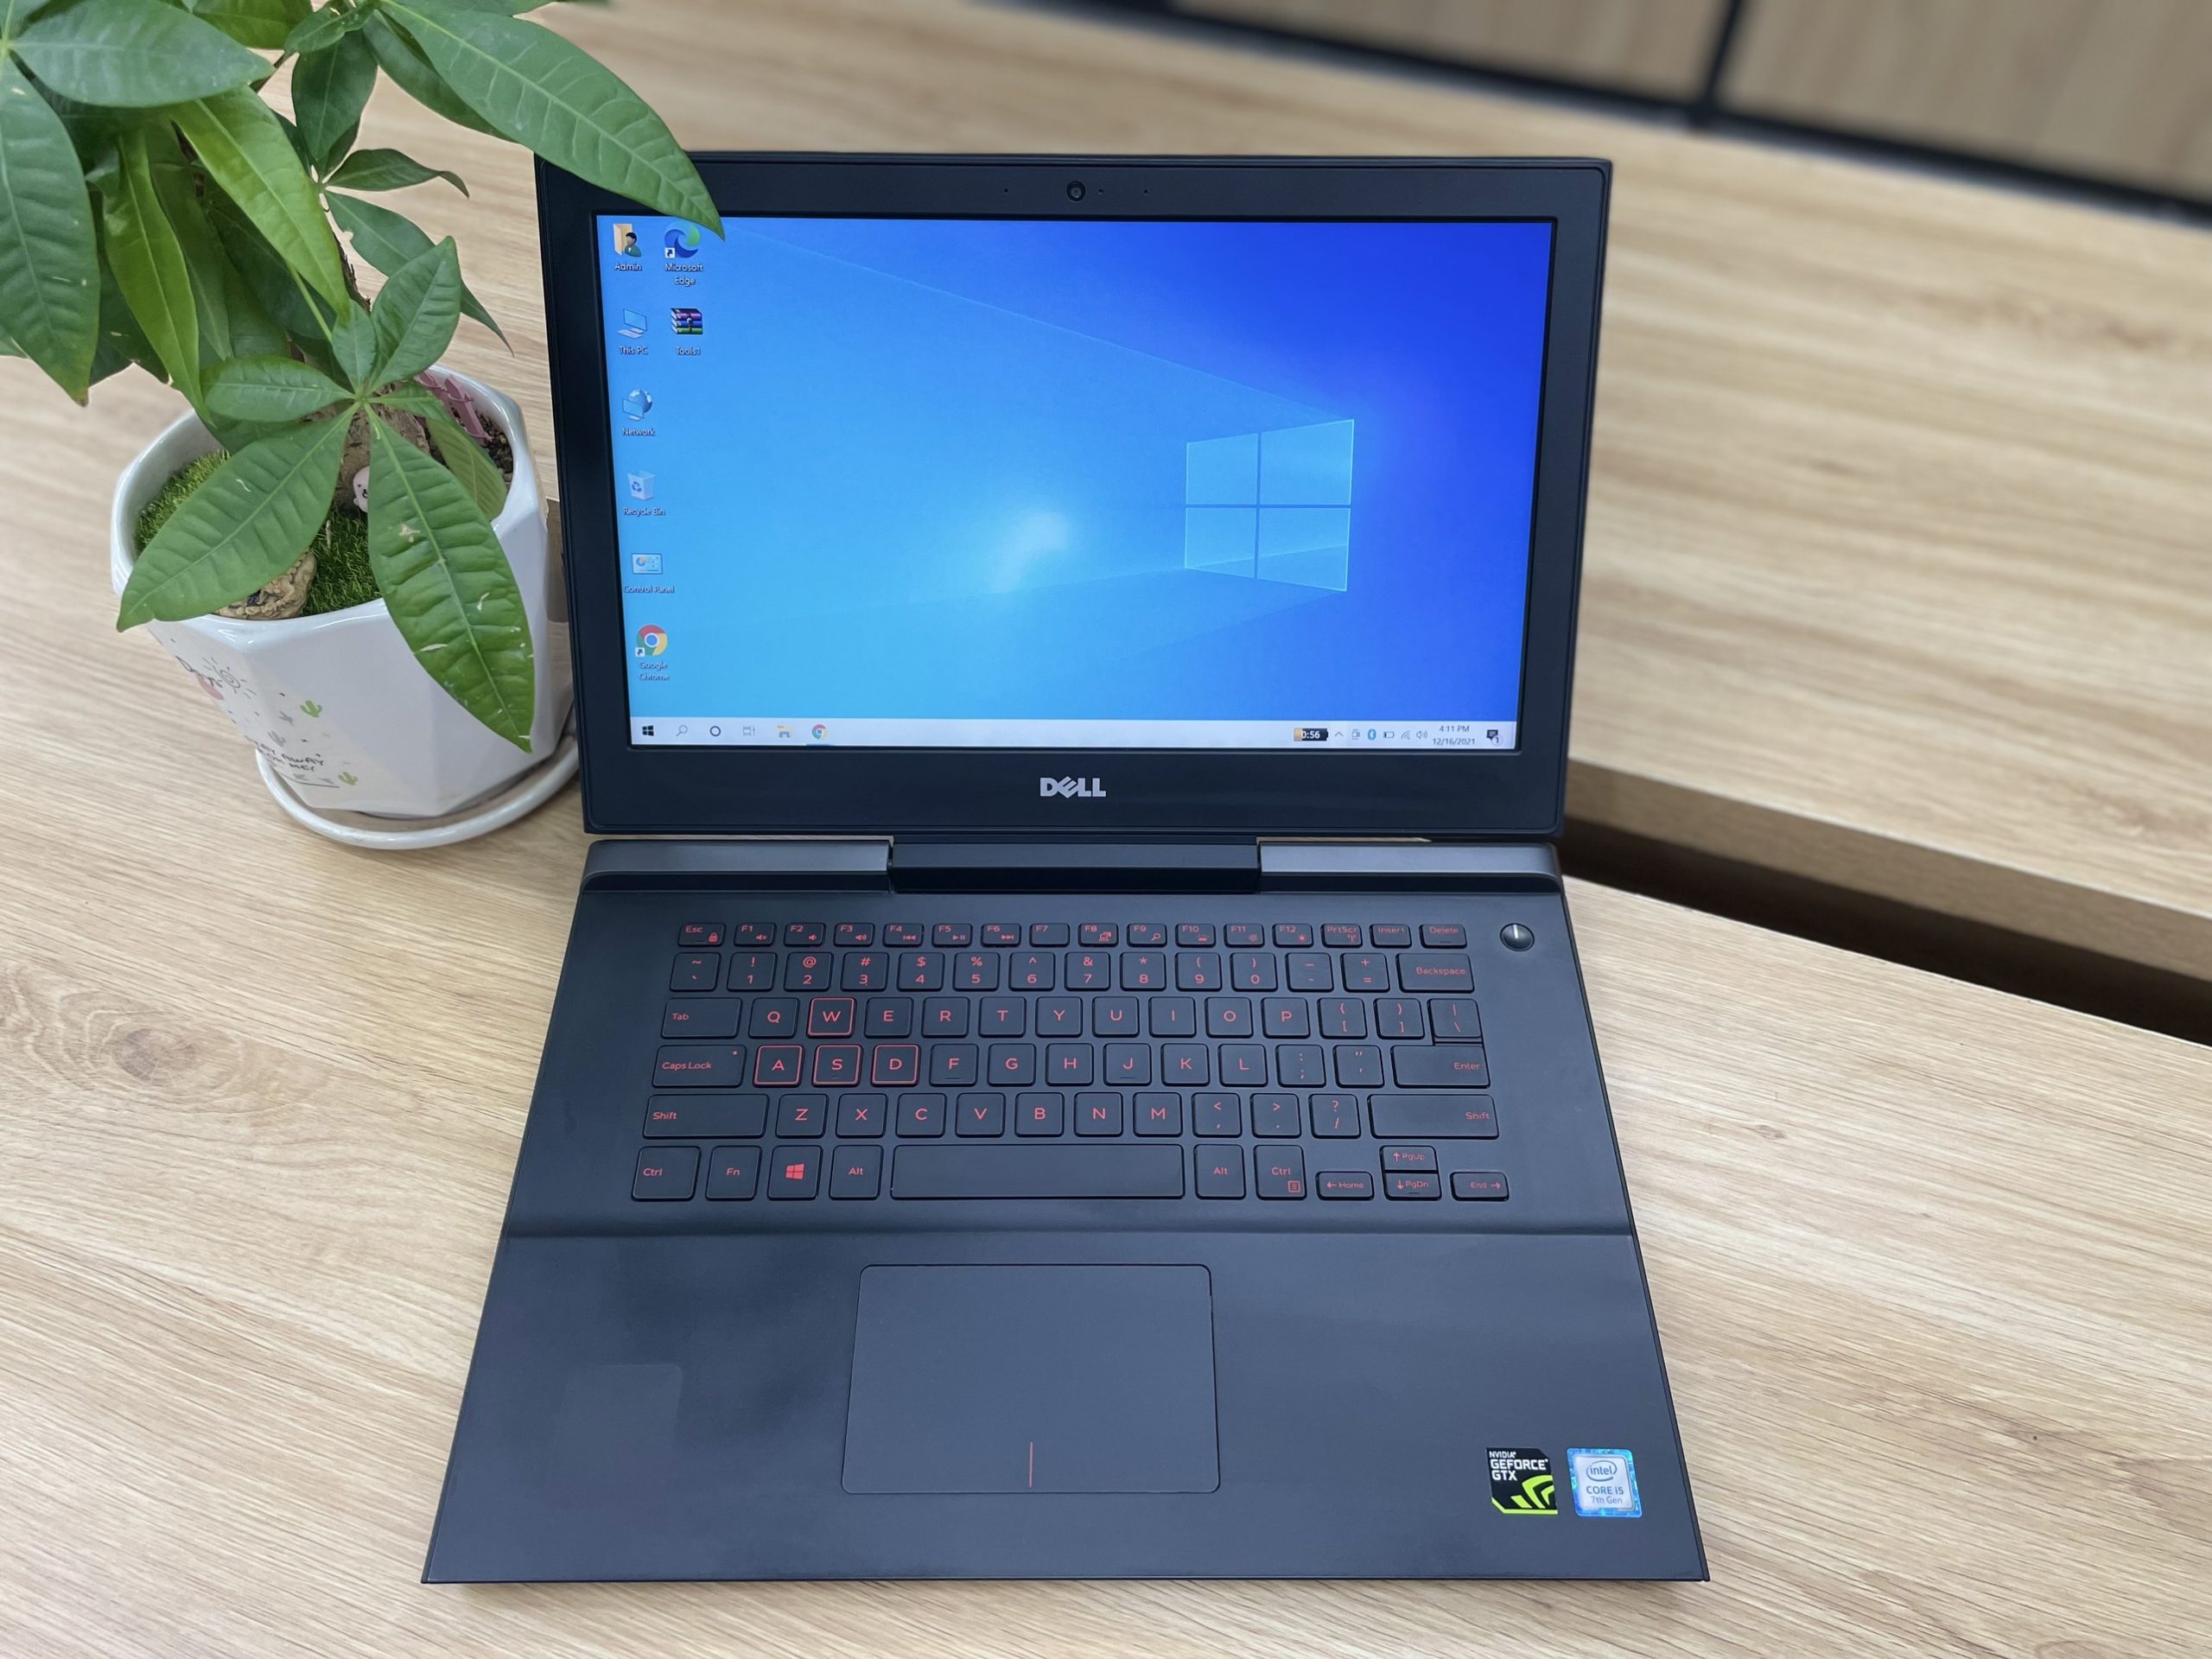 LAPTOP GAMING DELL INSPIRON 7467